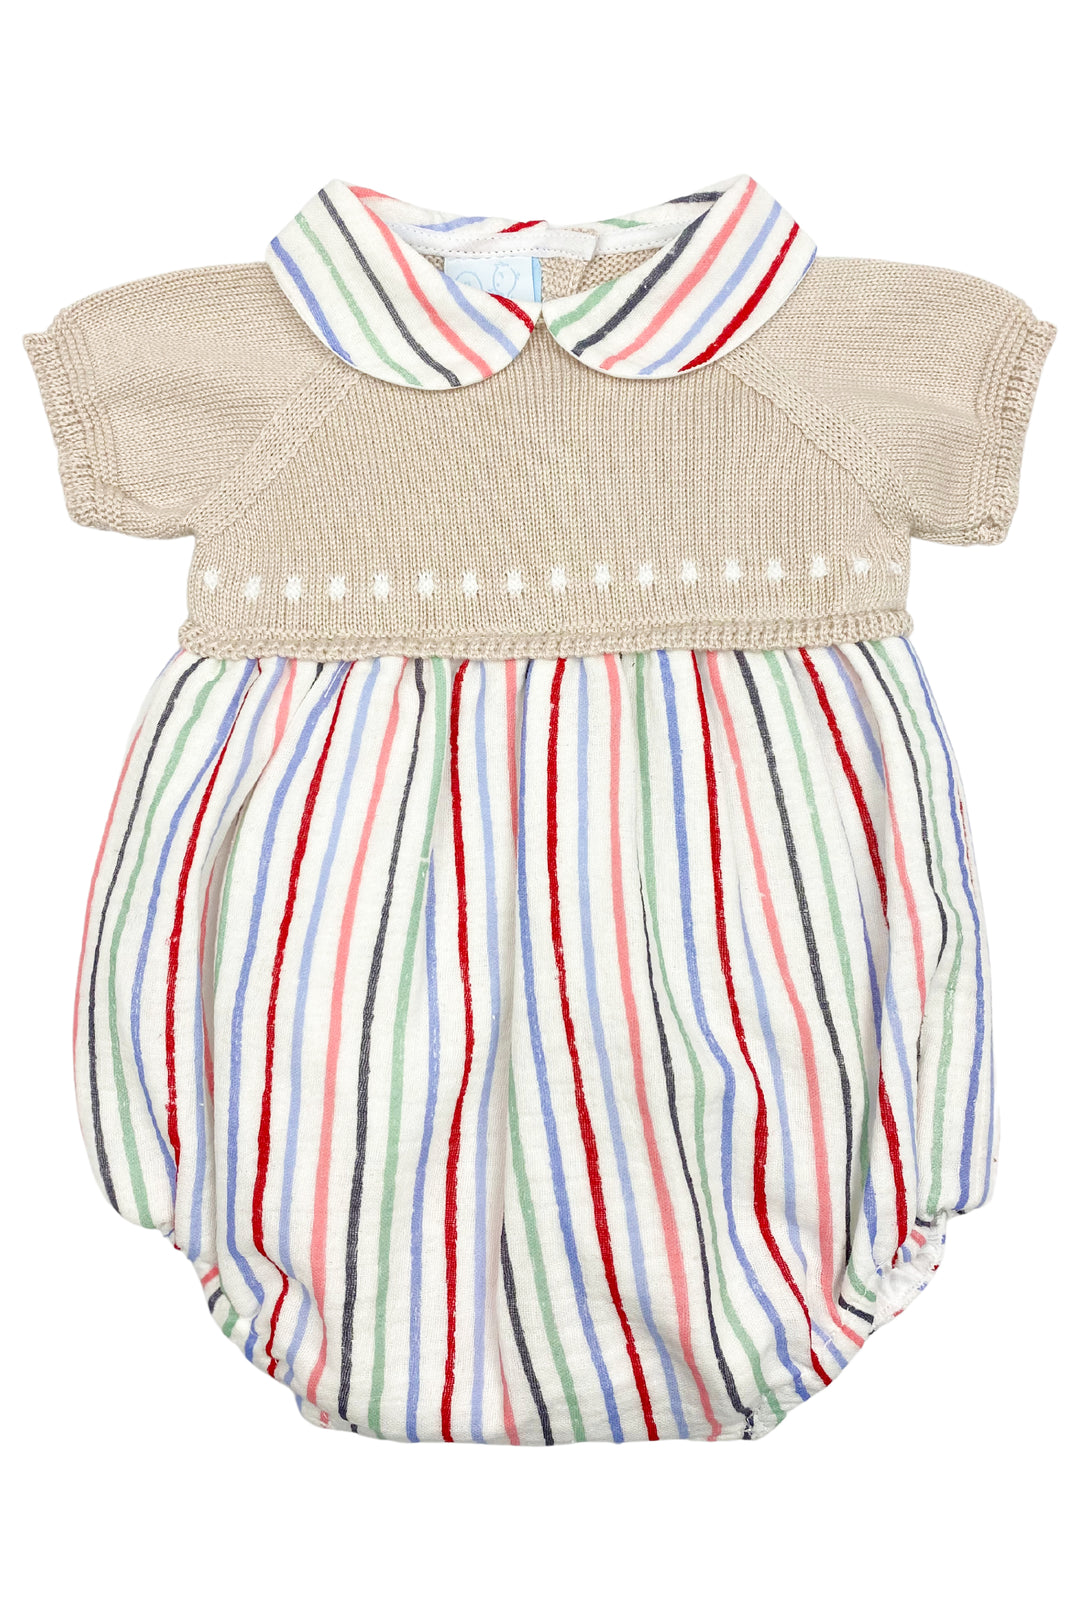 Granlei "Levi" Stone Half Knit Striped Romper | iphoneandroidapplications